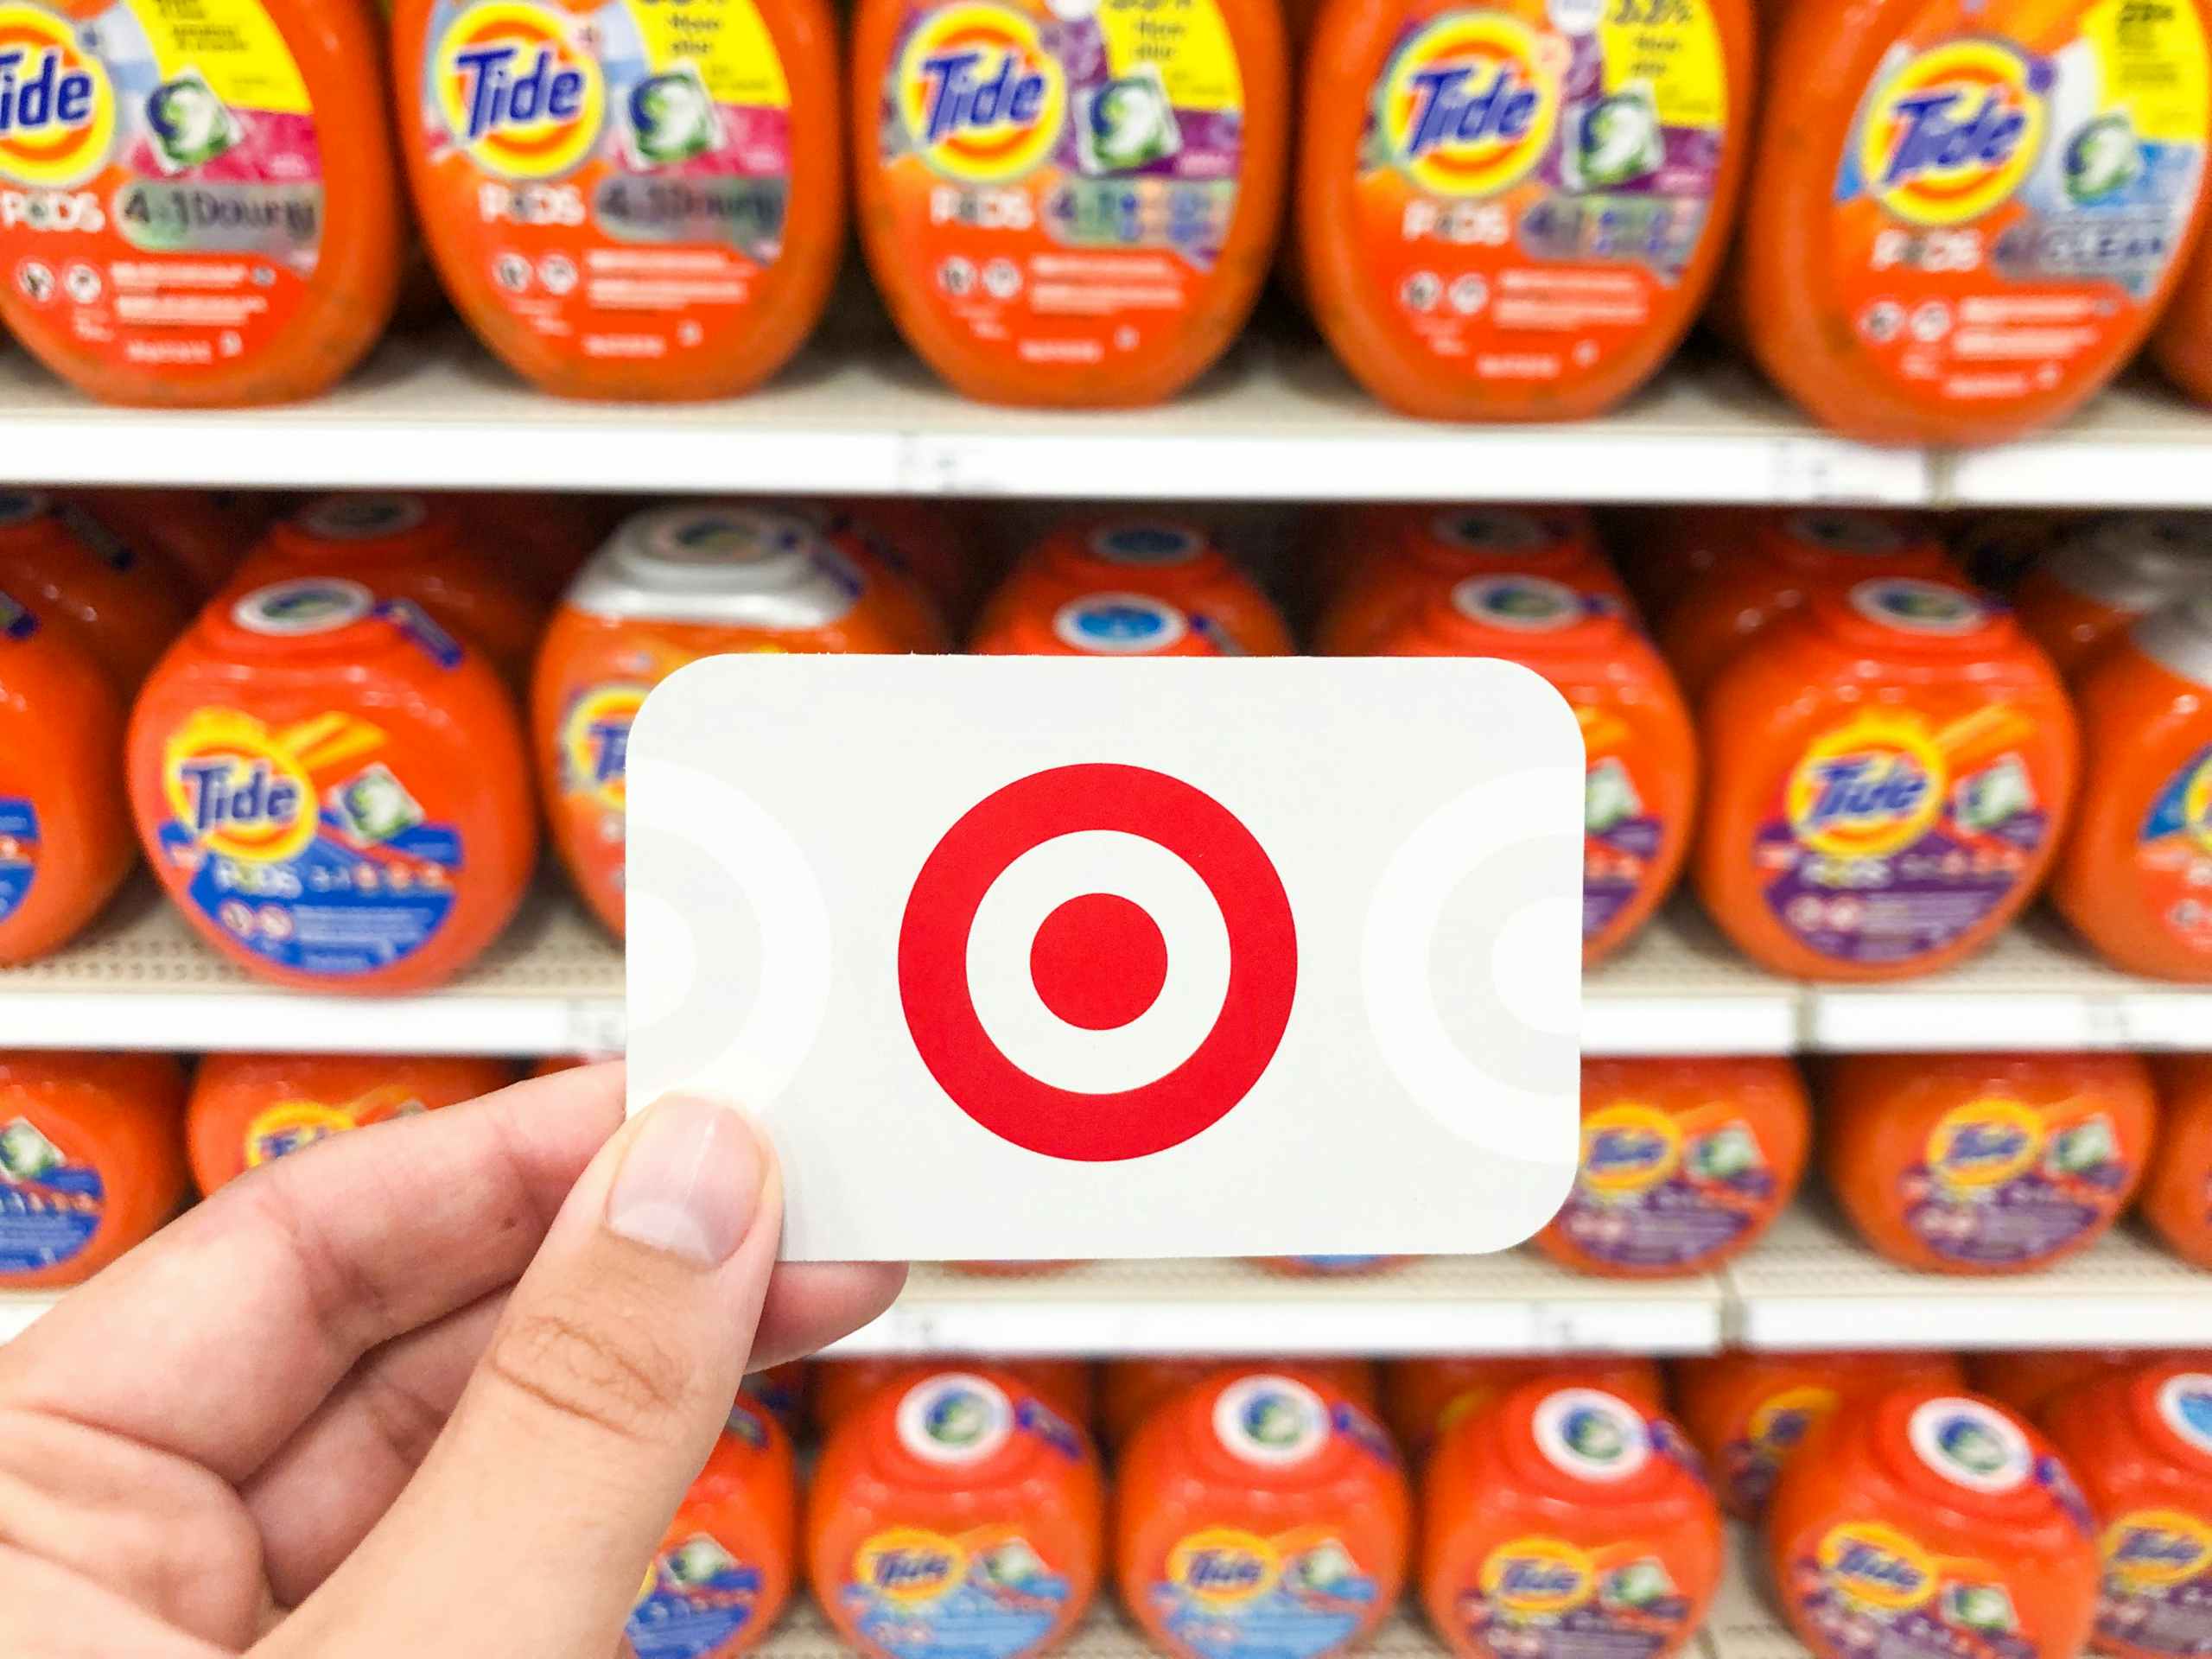 hnad holding target gift crad in front of Tide pods shelf